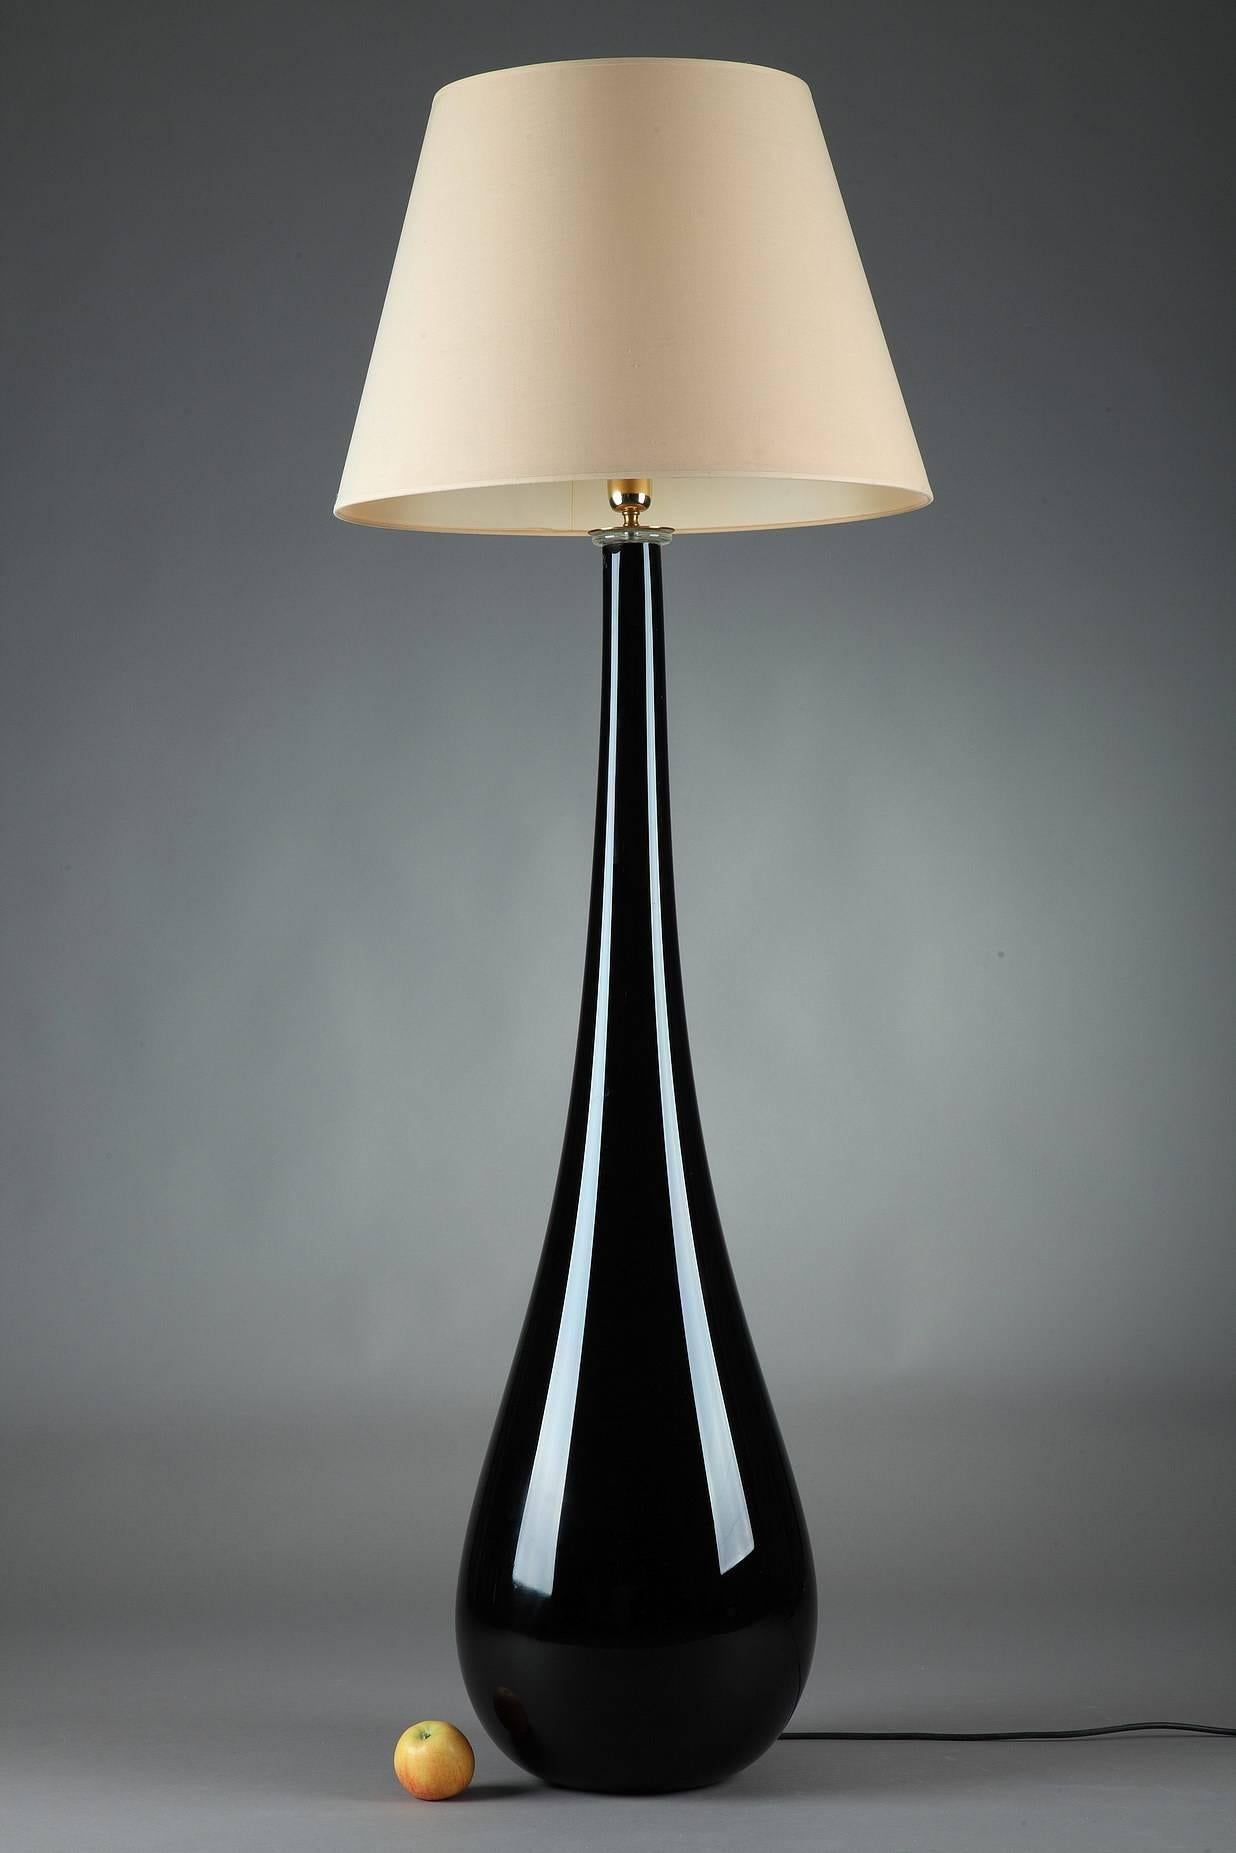 Large black coloured glass lamp, provided with a white conical lampshade on a baluster foot. Italian work of the 1970s. Very good condition.

Measures: H. without lampshade: 122 cm.
H. with lampshade: 153 cm,

circa 1970
Dimension: W 21.7 in x